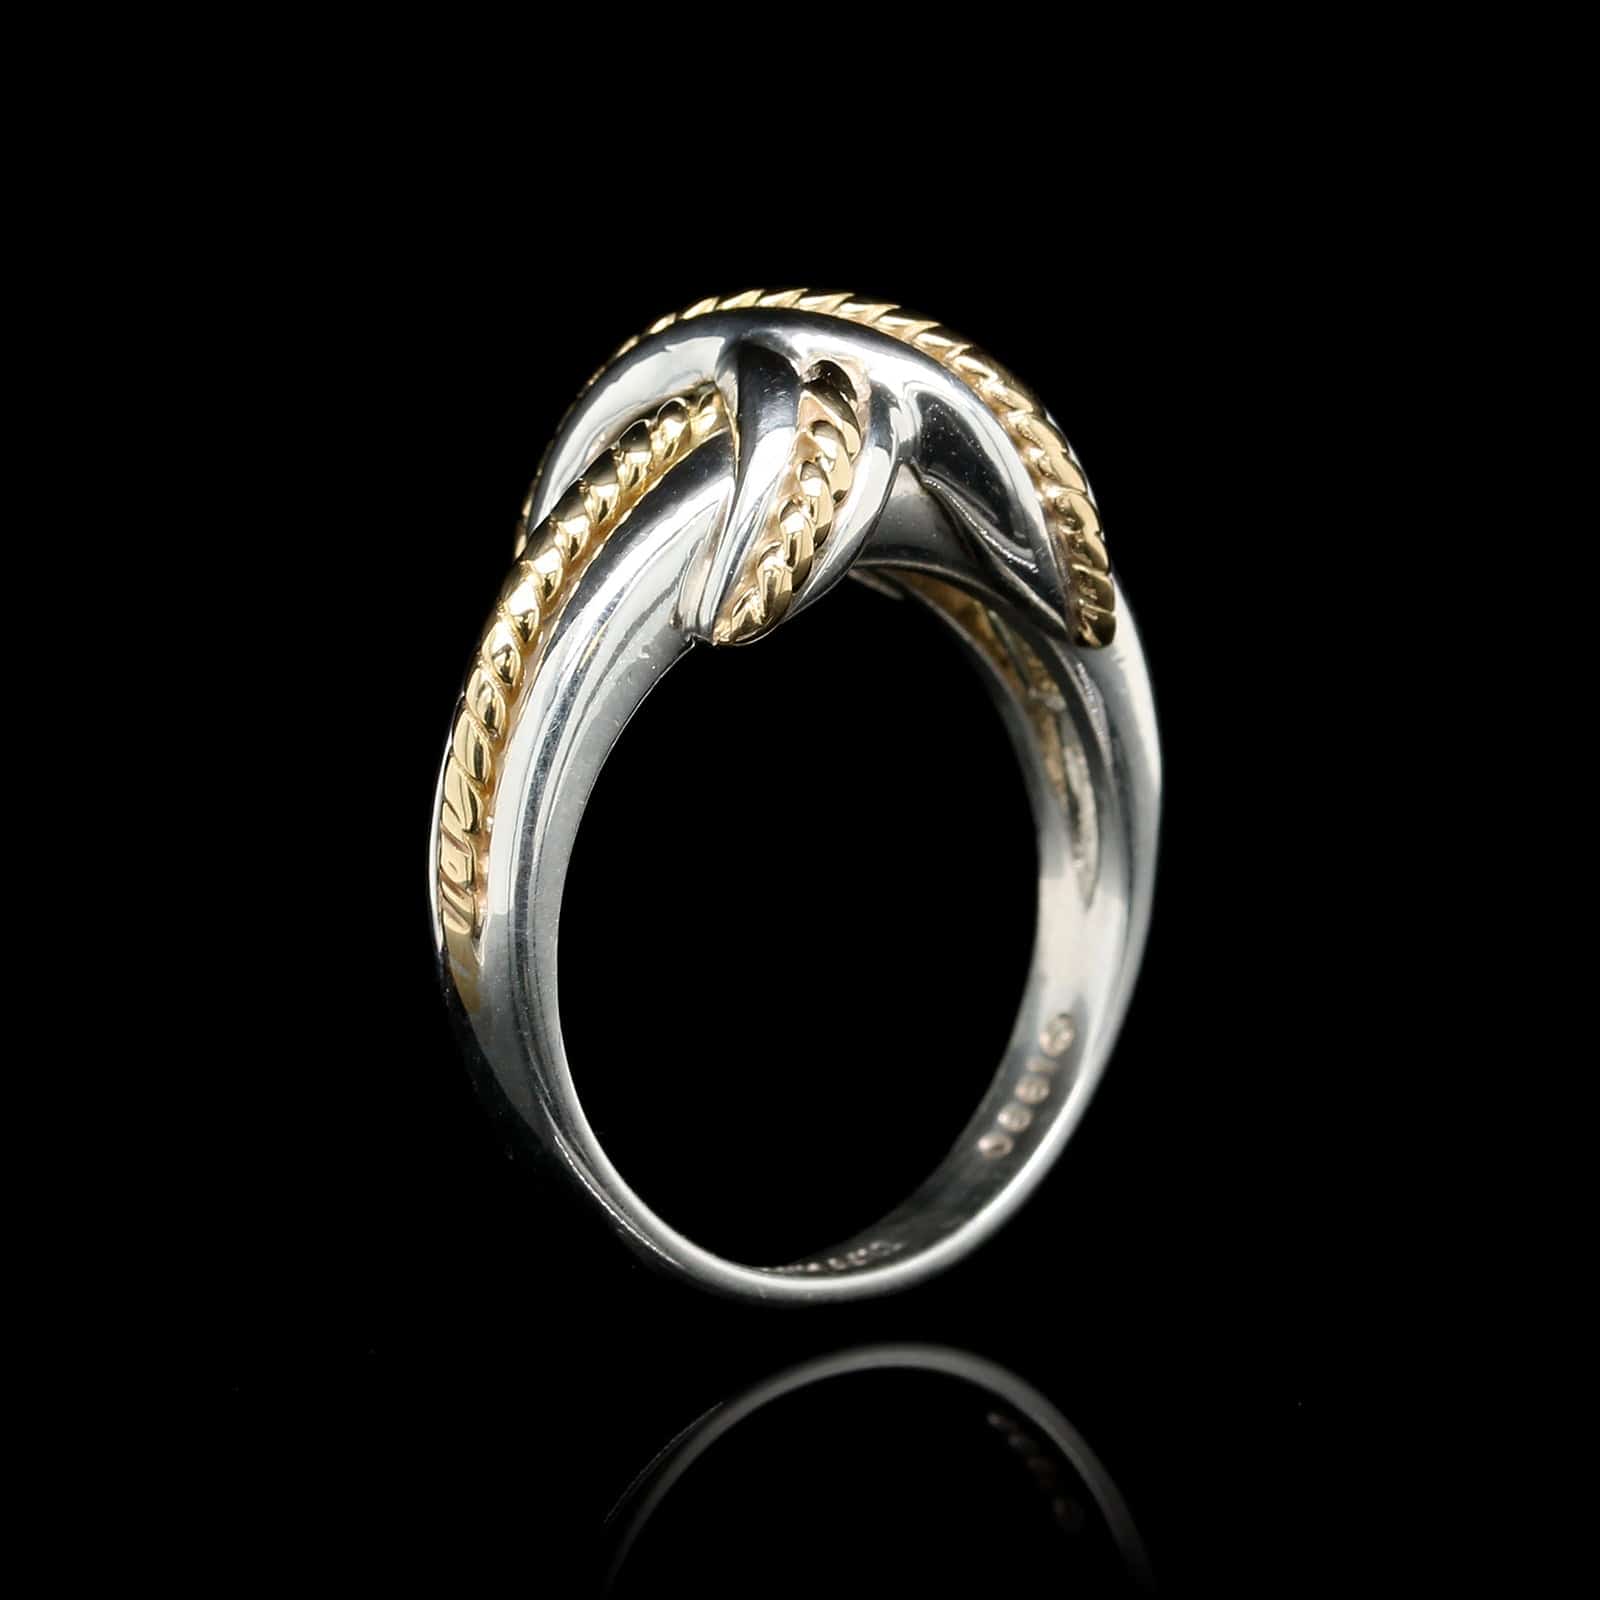 Tiffany & Co. Sterling Silver and 18K Yellow Gold Estate Signature X Ring